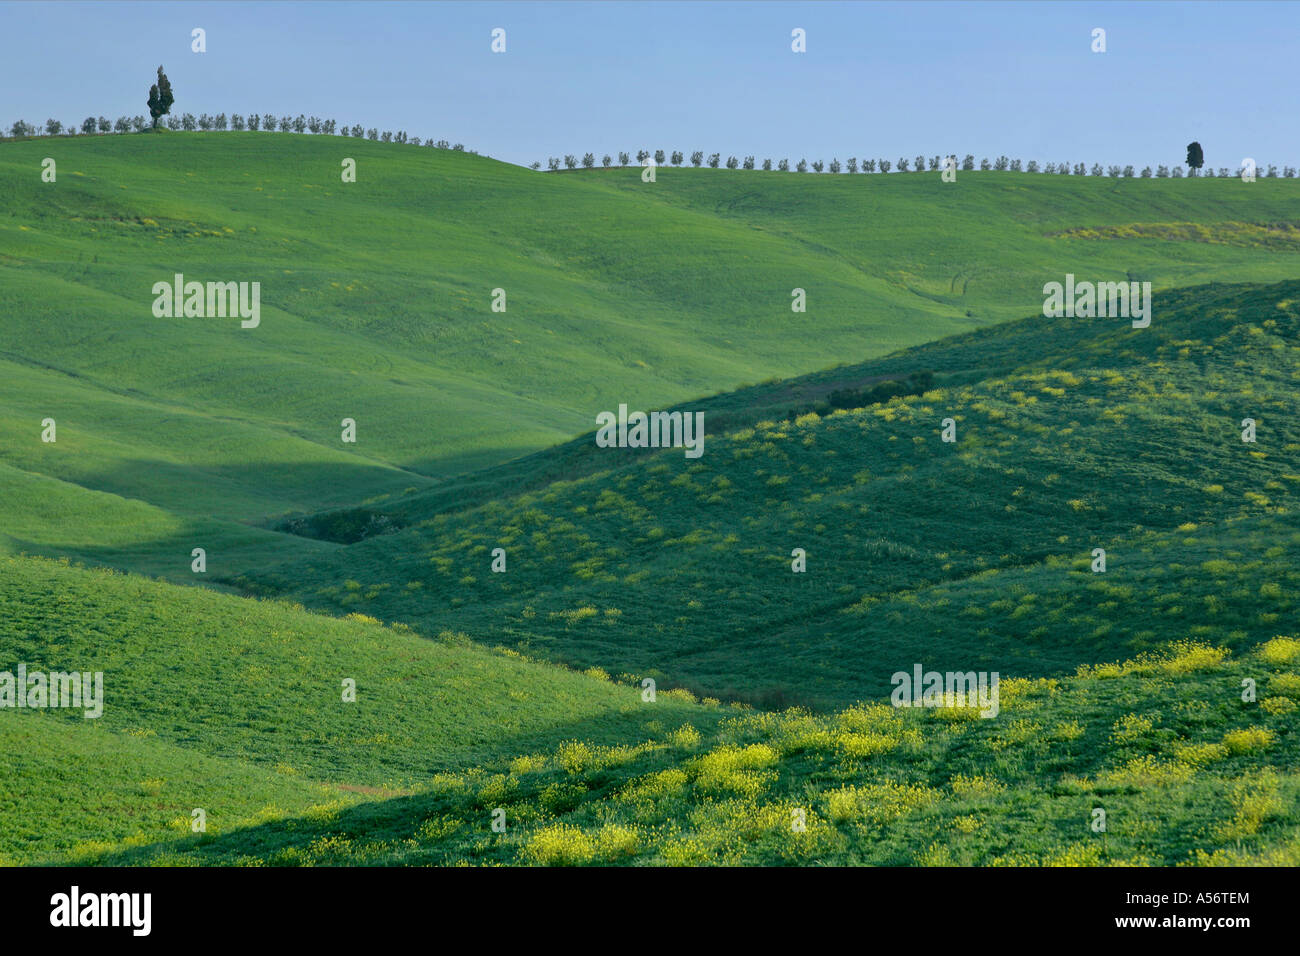 Huegellandschaft im Val d Orcia Toskana Italien landscape with hills in Val d Orcia Tuscany Italy Stock Photo